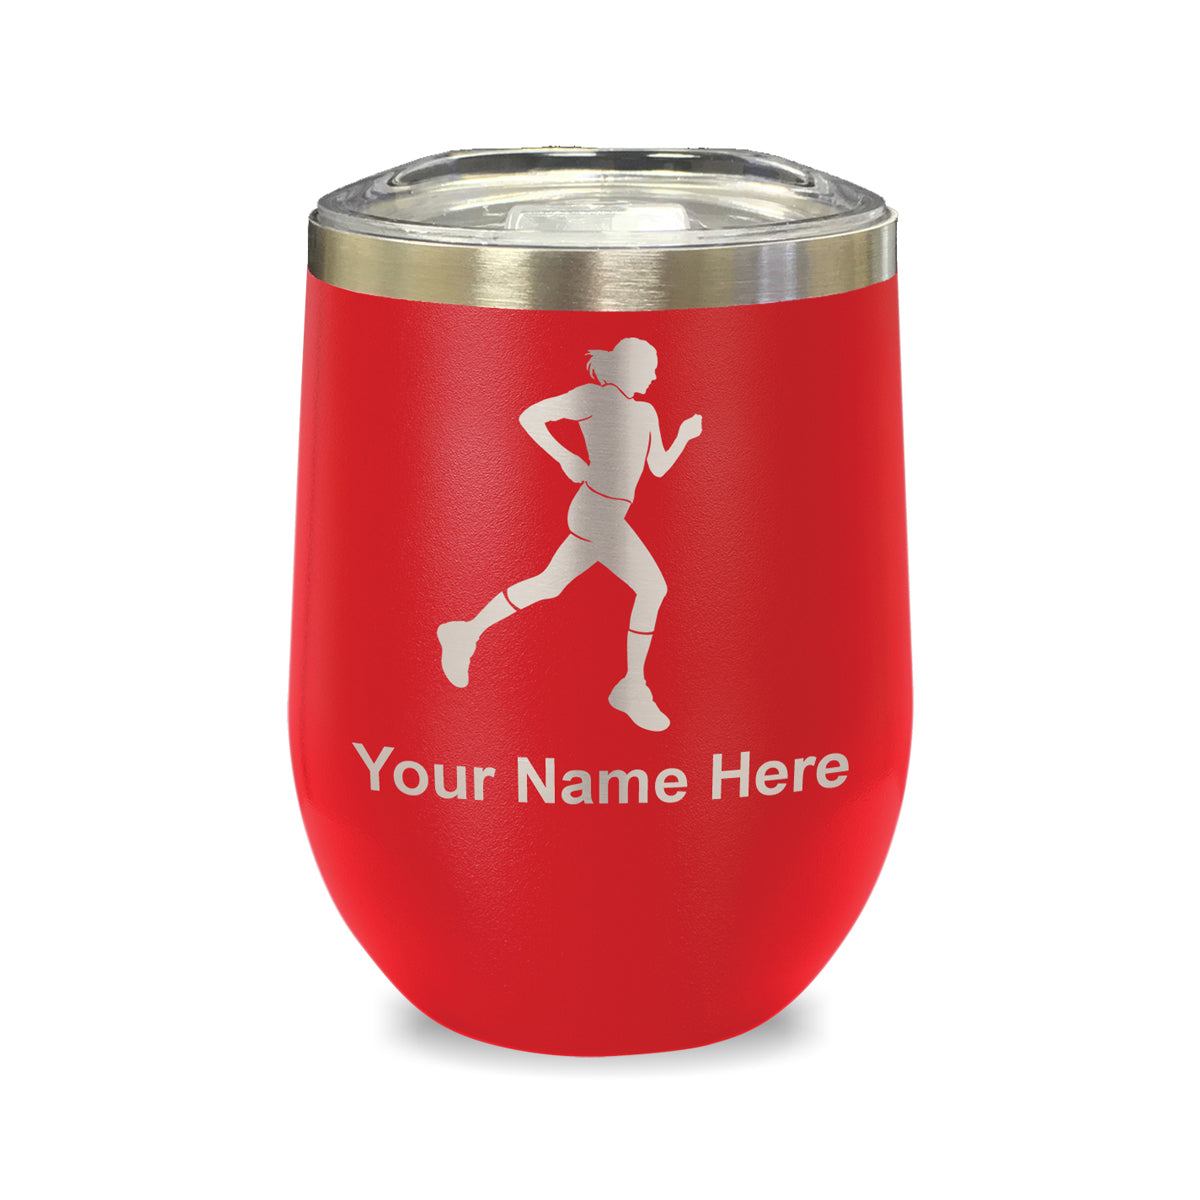 LaserGram Double Wall Stainless Steel Wine Glass, Running Woman, Personalized Engraving Included